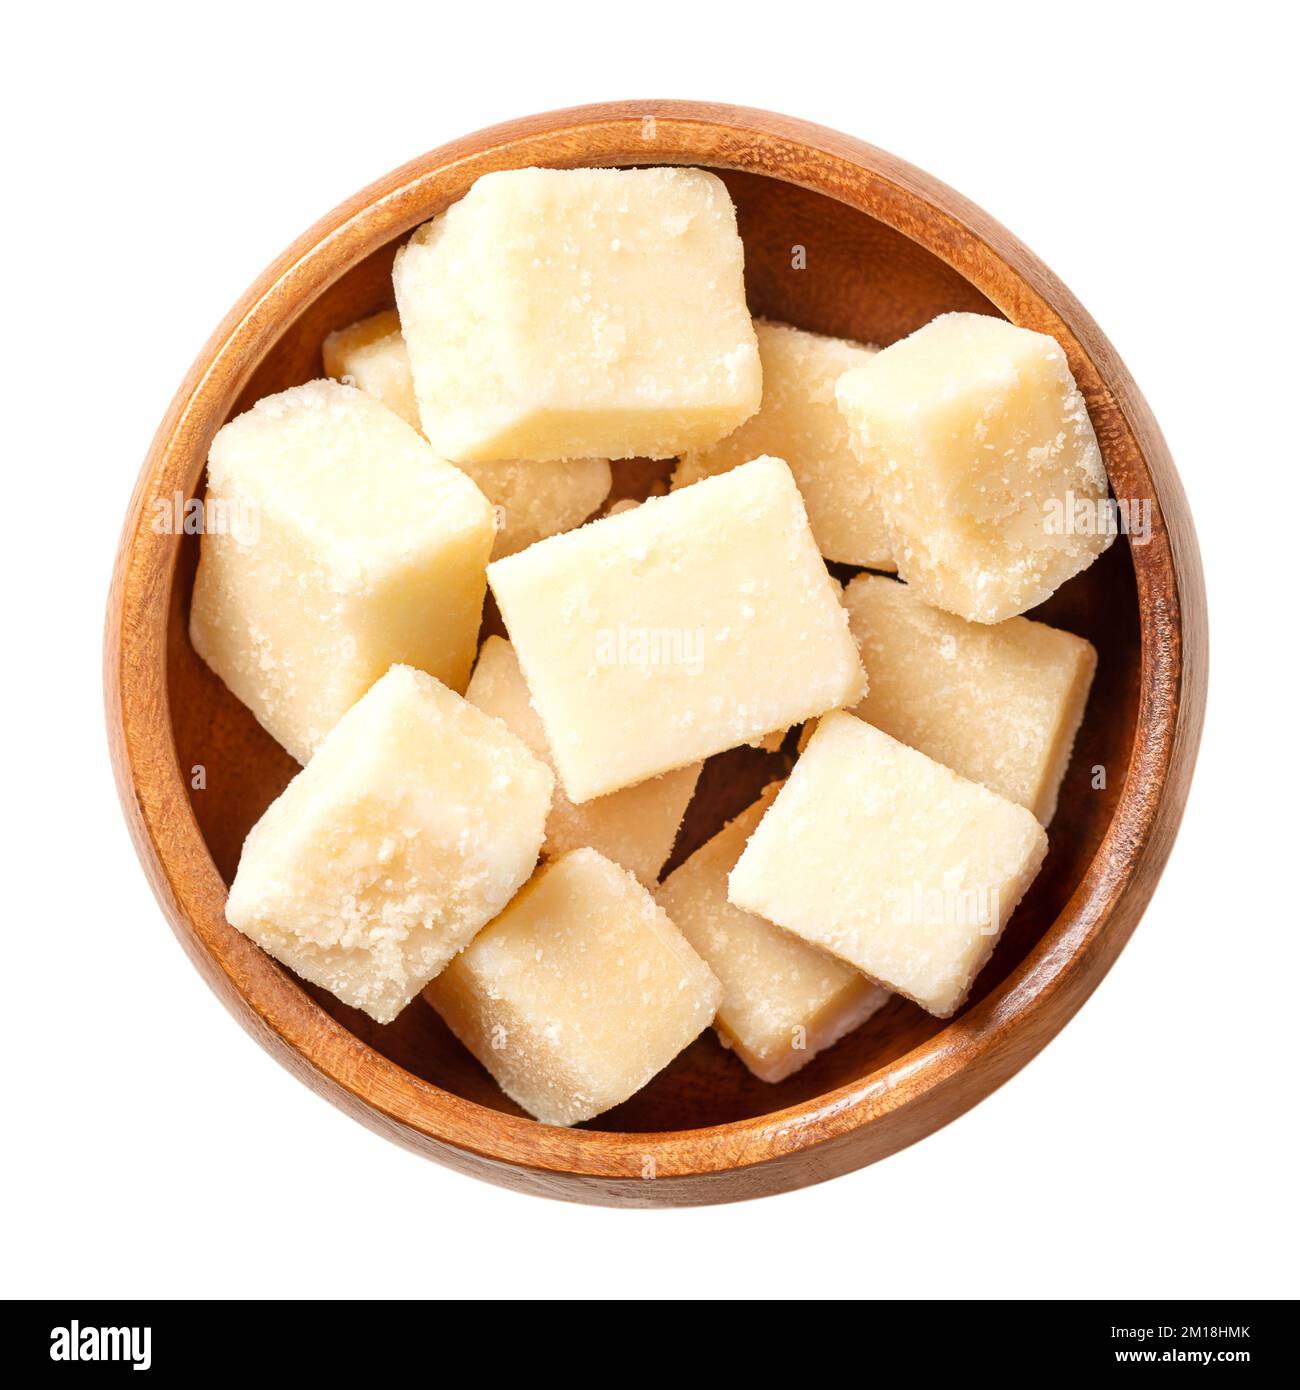 Grana Padano cheese cubes, in a wooden bowl. Italian hard cheese chunks, similar to Parmesan, crumbly-textured, with strong savory flavor. Stock Photo